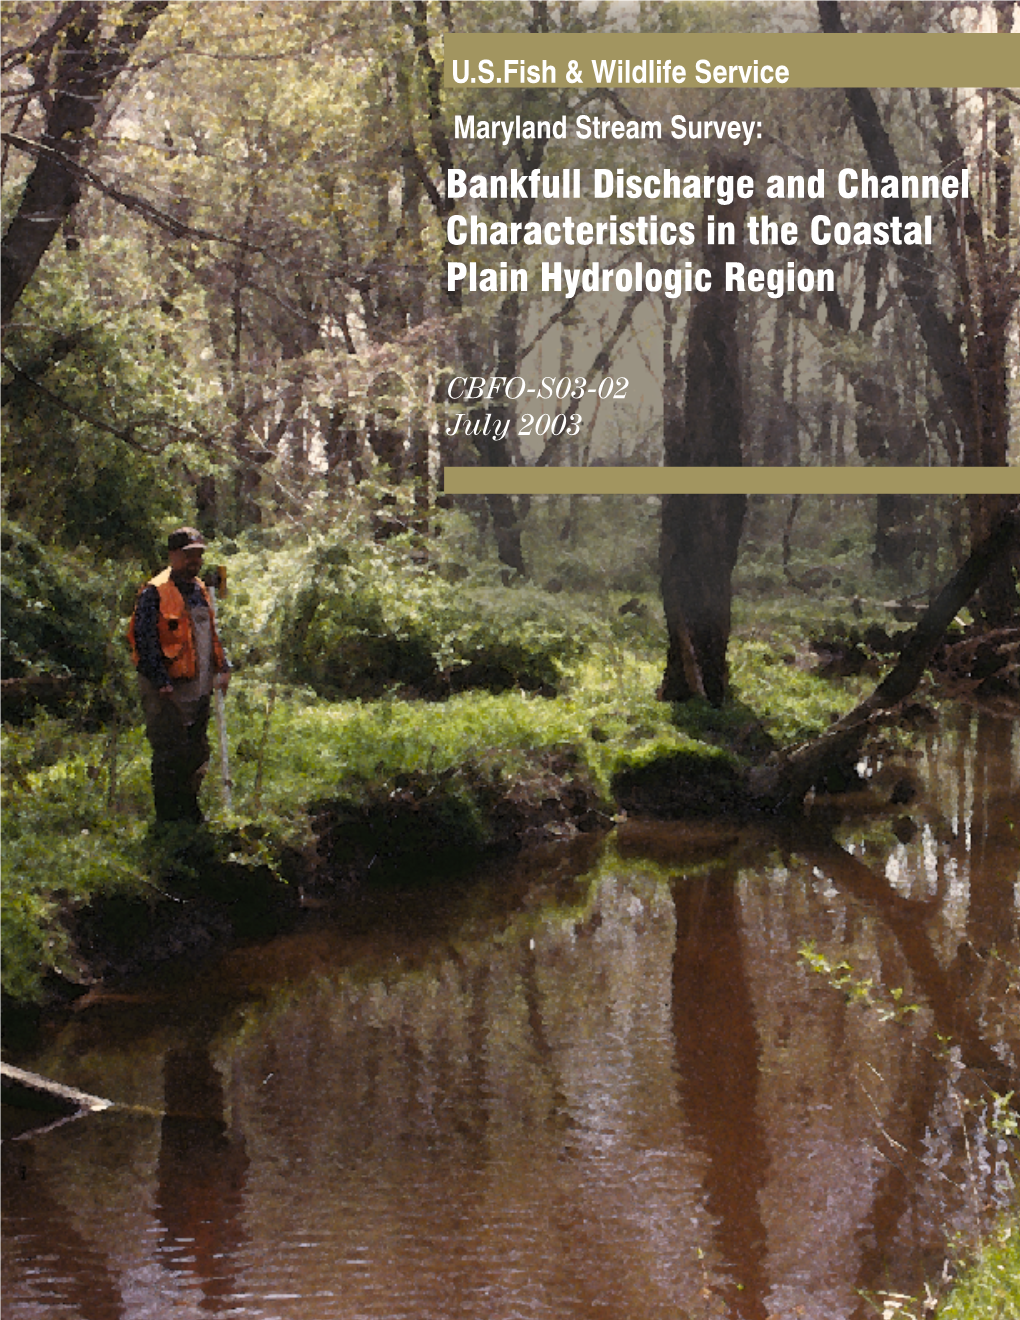 Bankfull Discharge and Channel Characteristics in the Coastal Plain Hydrologic Region